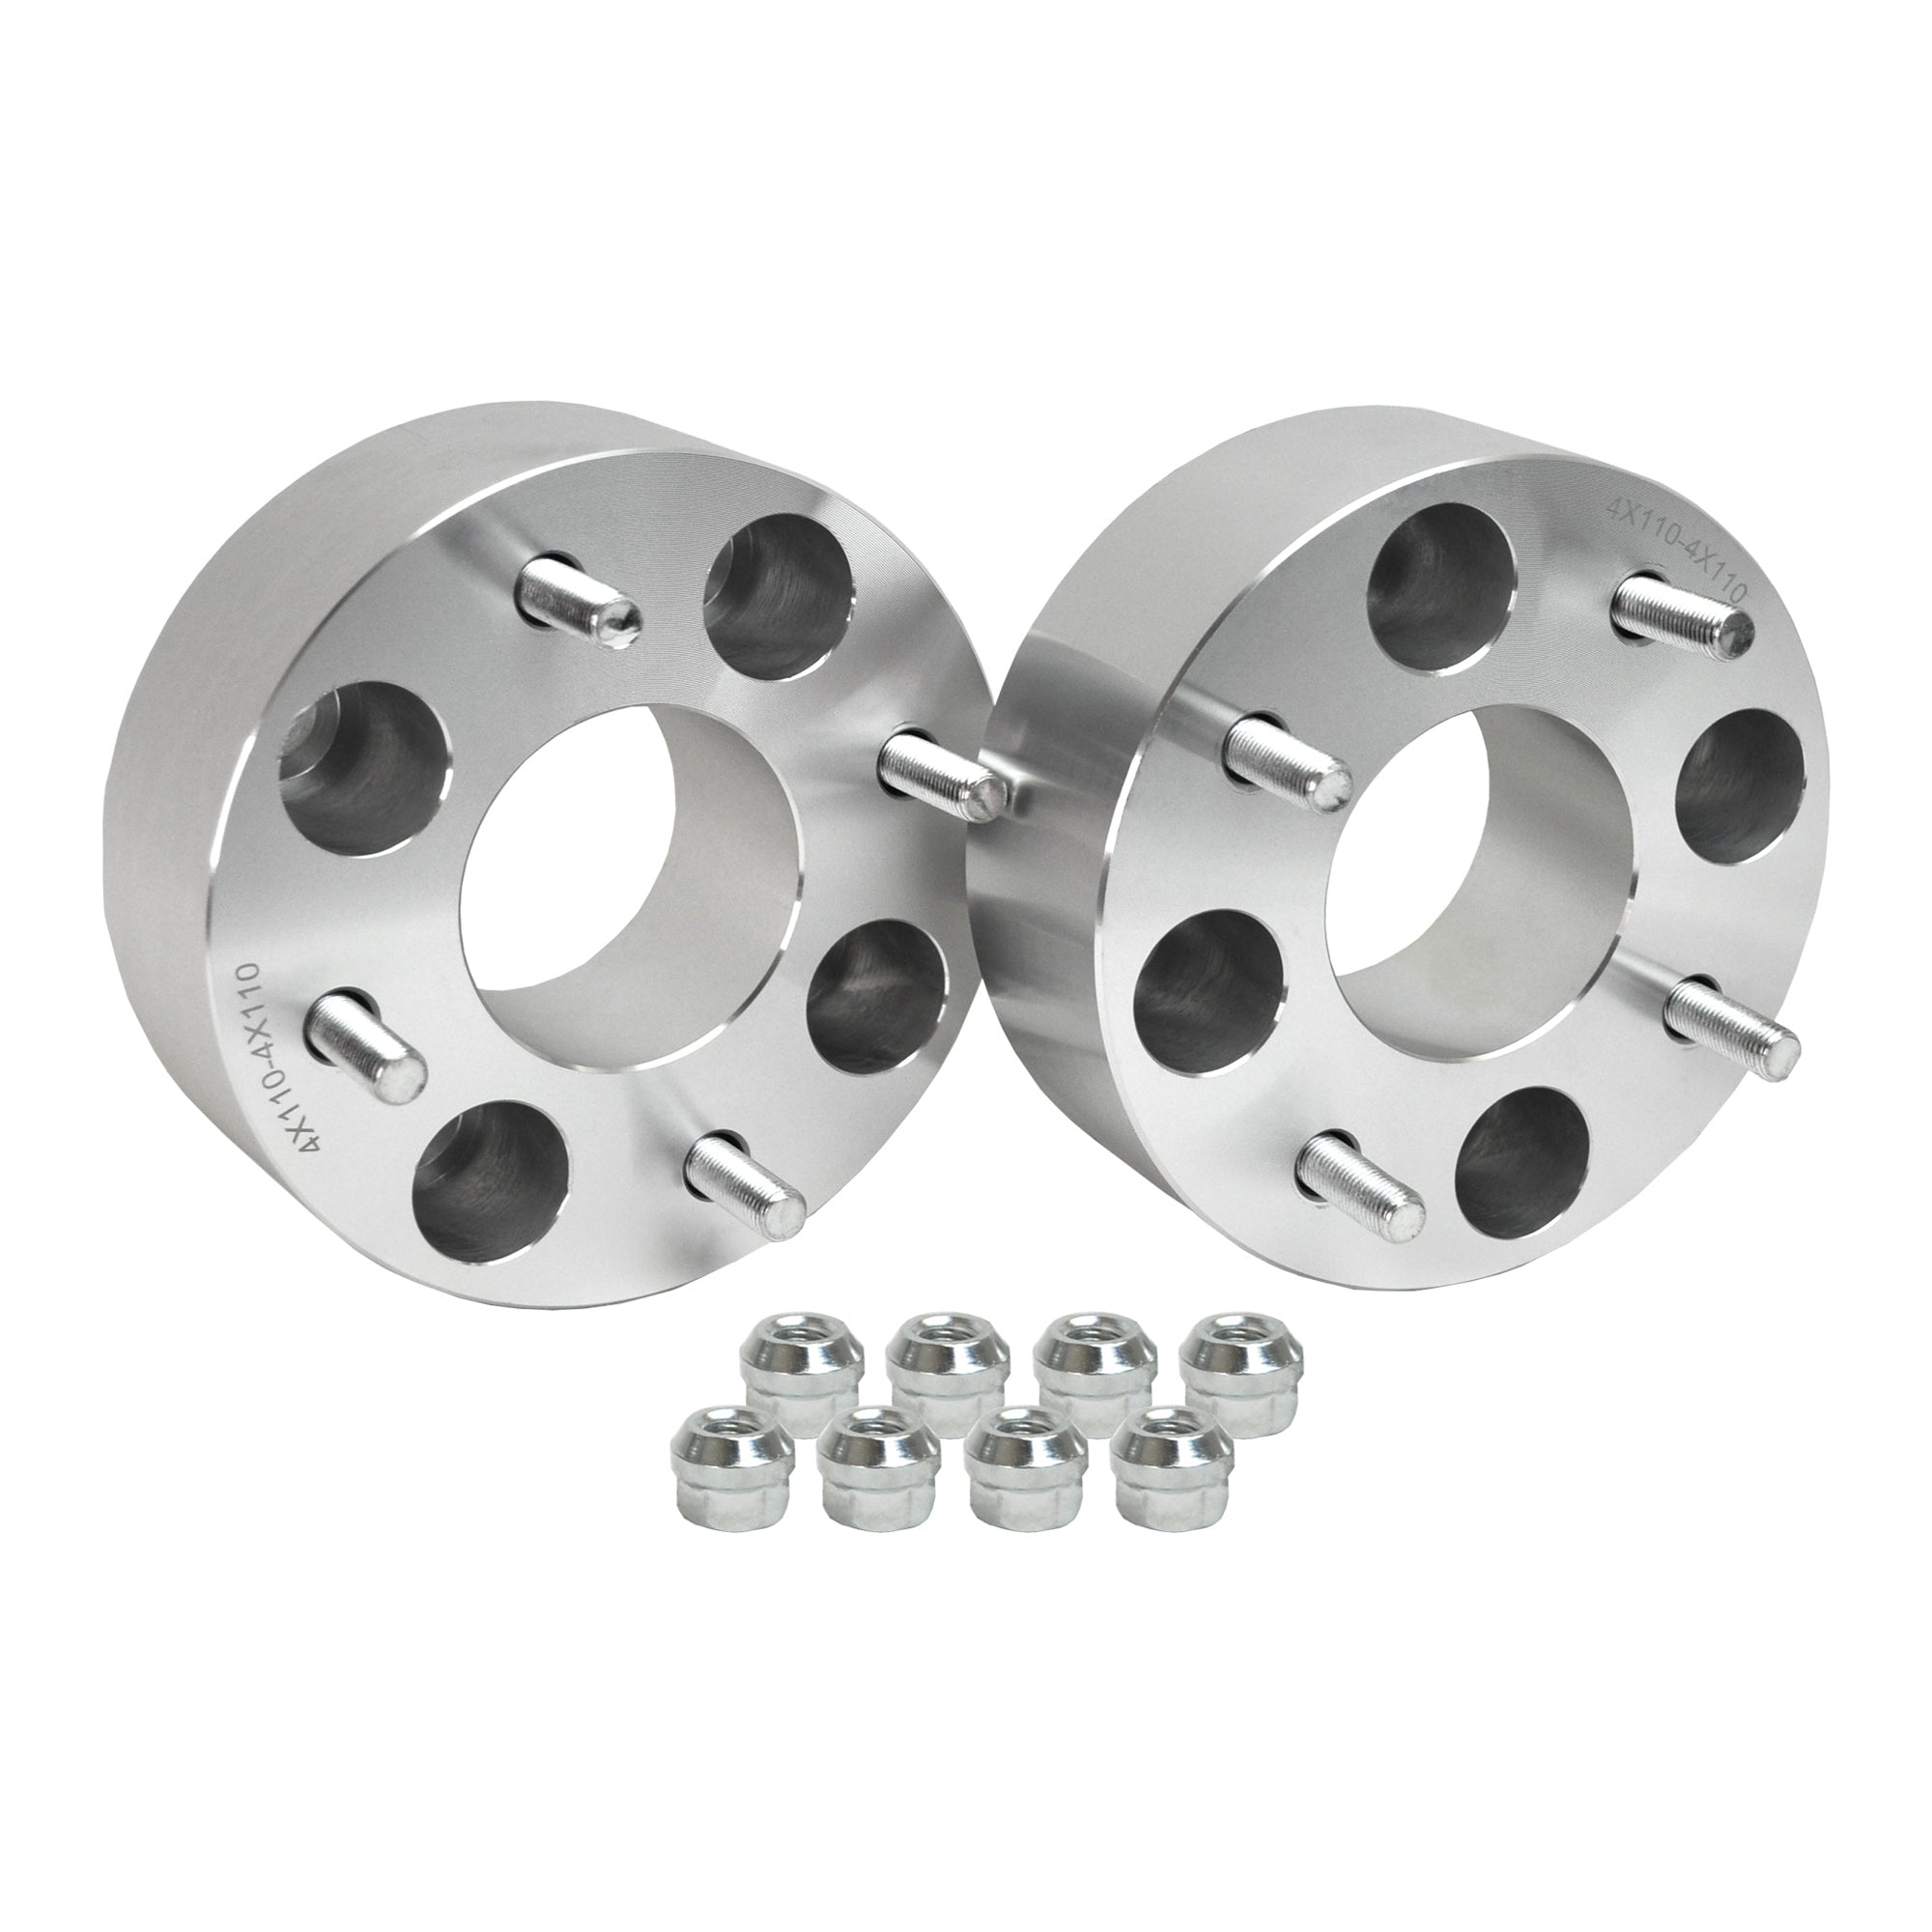 Wheel Spacer for Can Am Renegade 800 